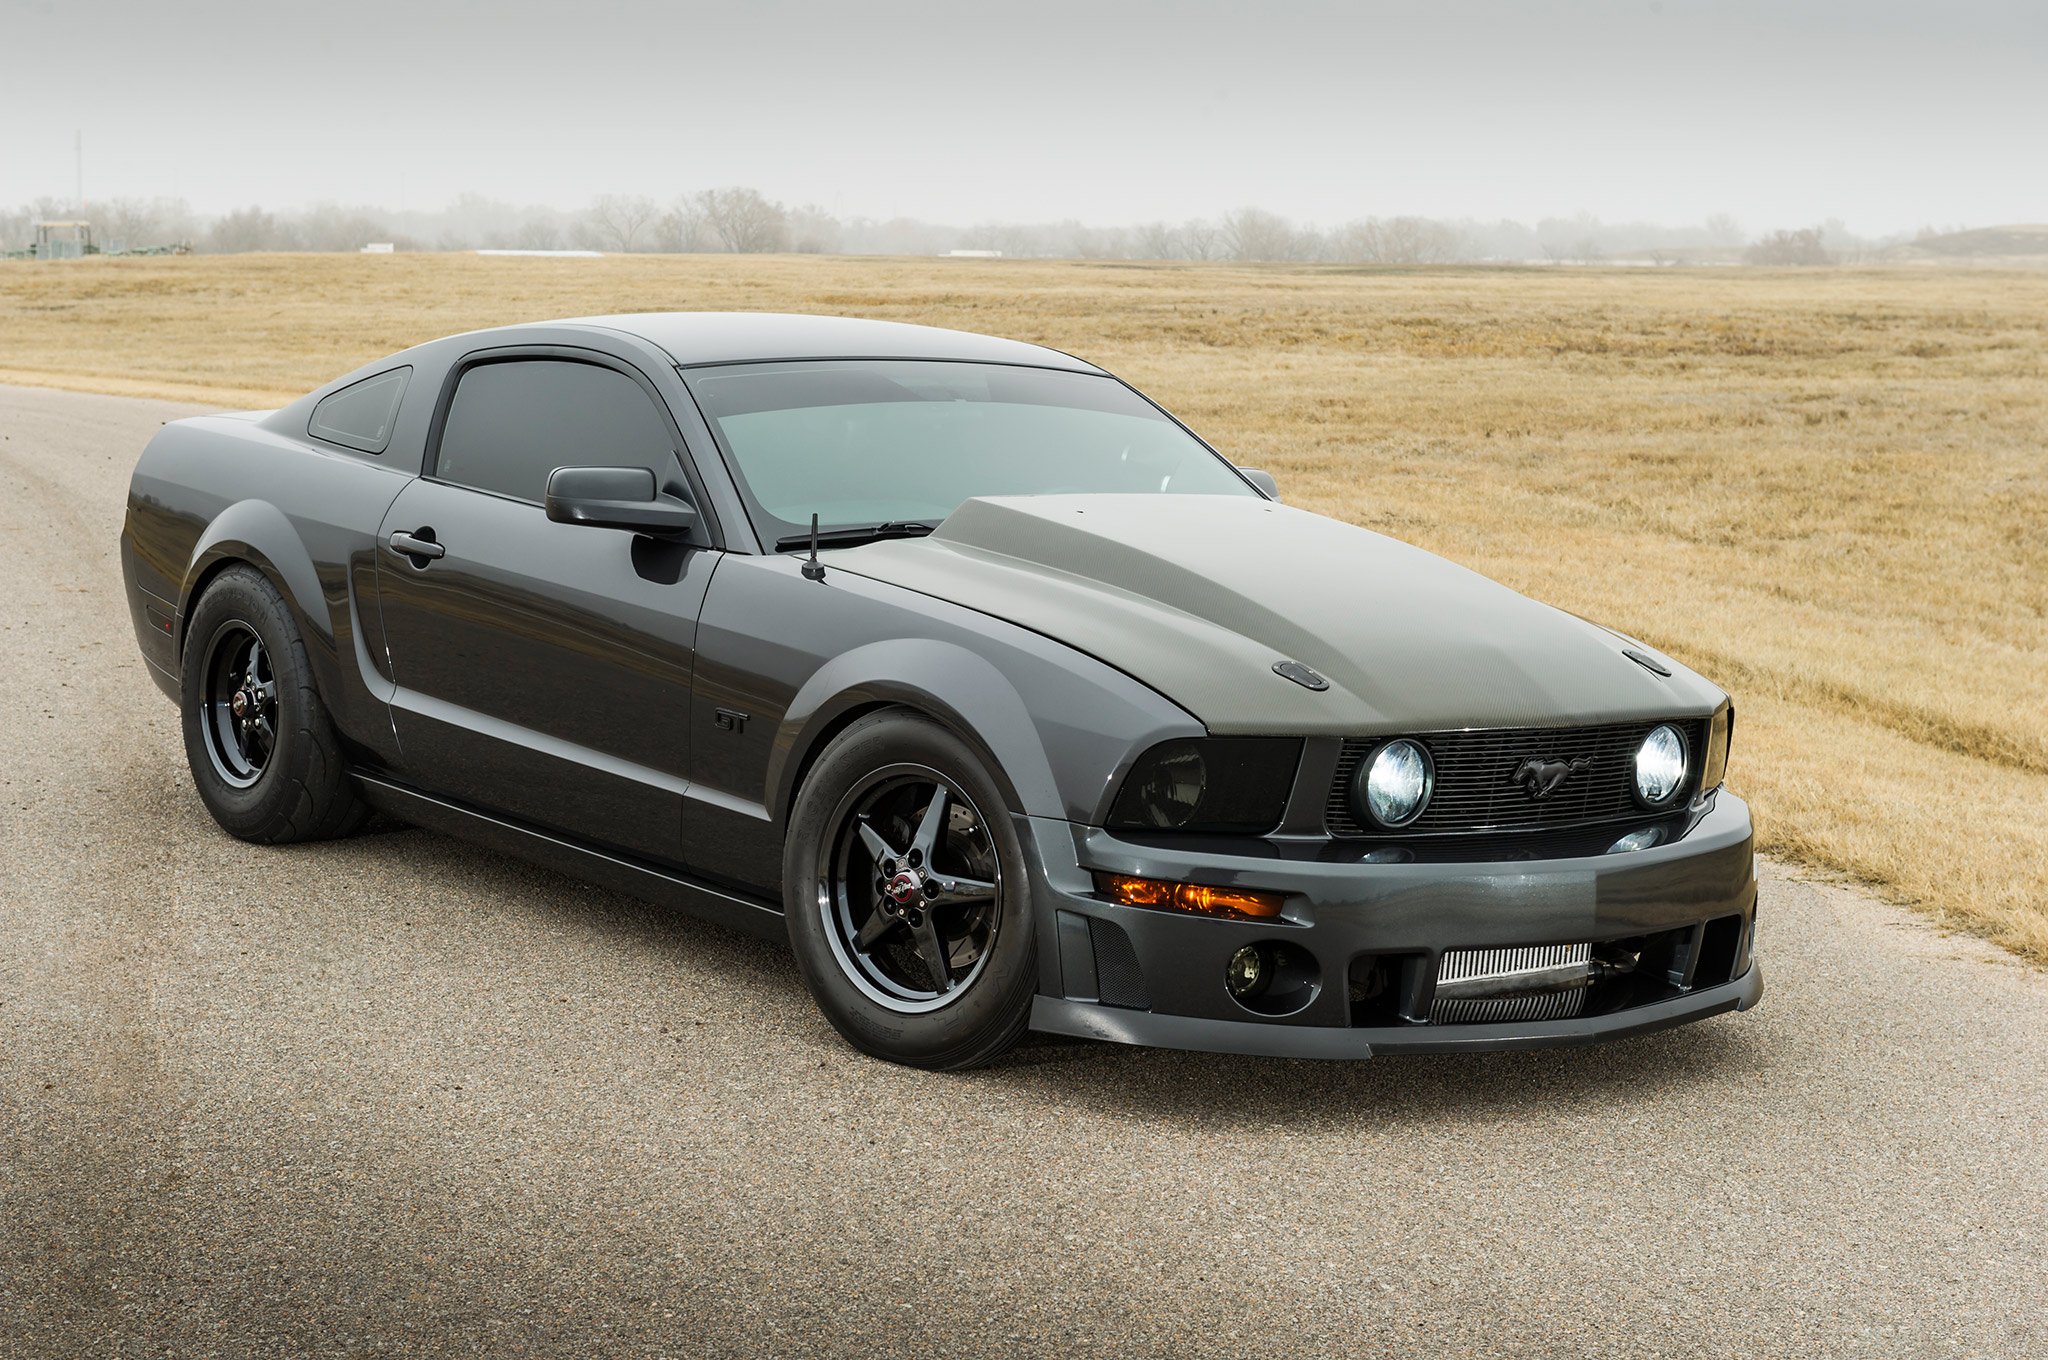 2007, Ford, Mustang, Gt, Pro, Street, Super, Drag, Muscle, Usa, 2048x1360 05 Wallpaper